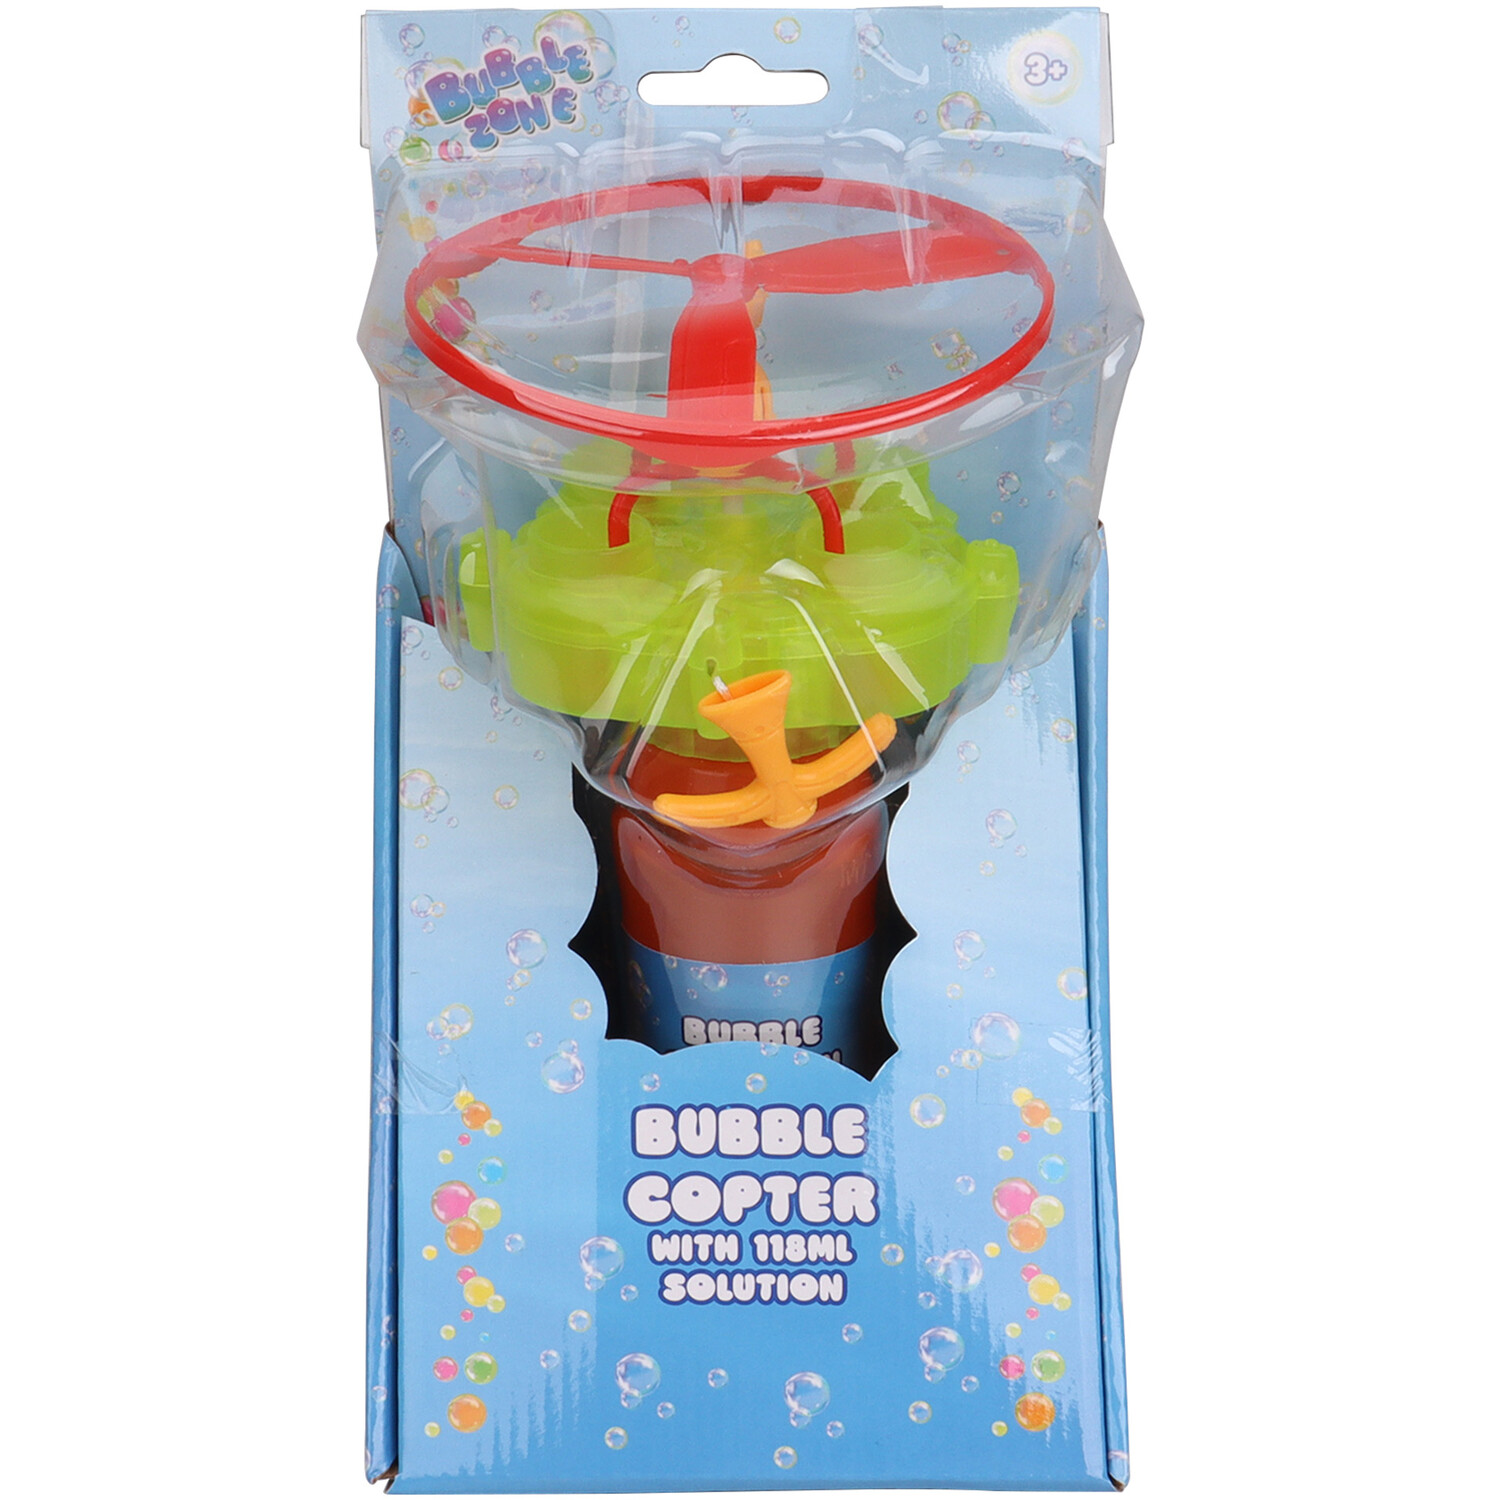 Bubble Copter with Bubble Solution - Red Image 1